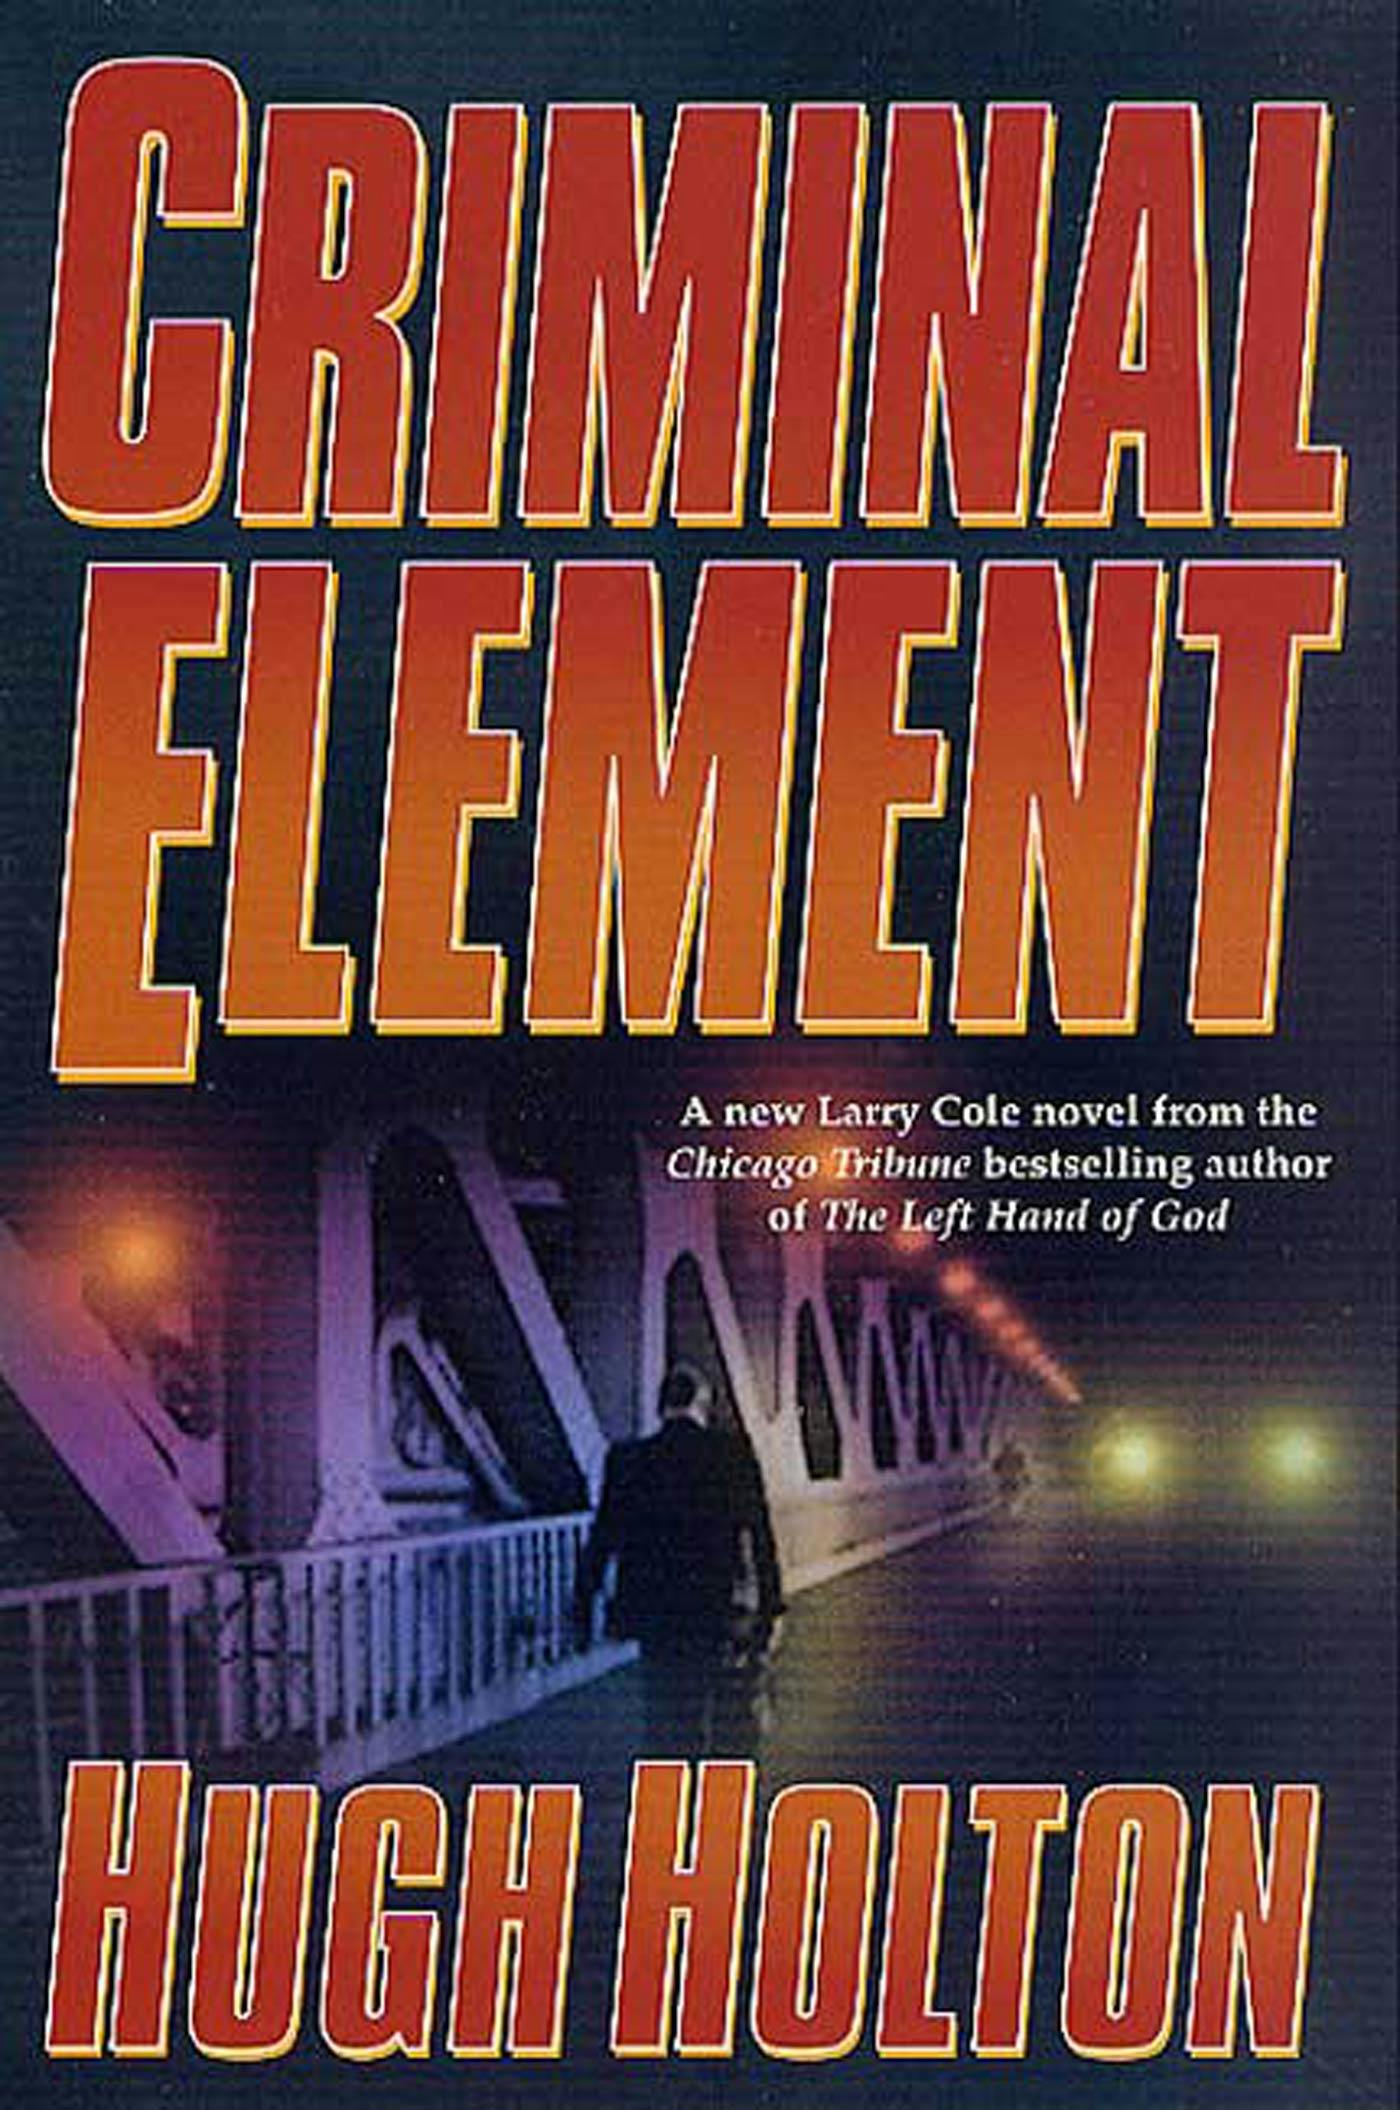 Cover for the book titled as: Criminal Element